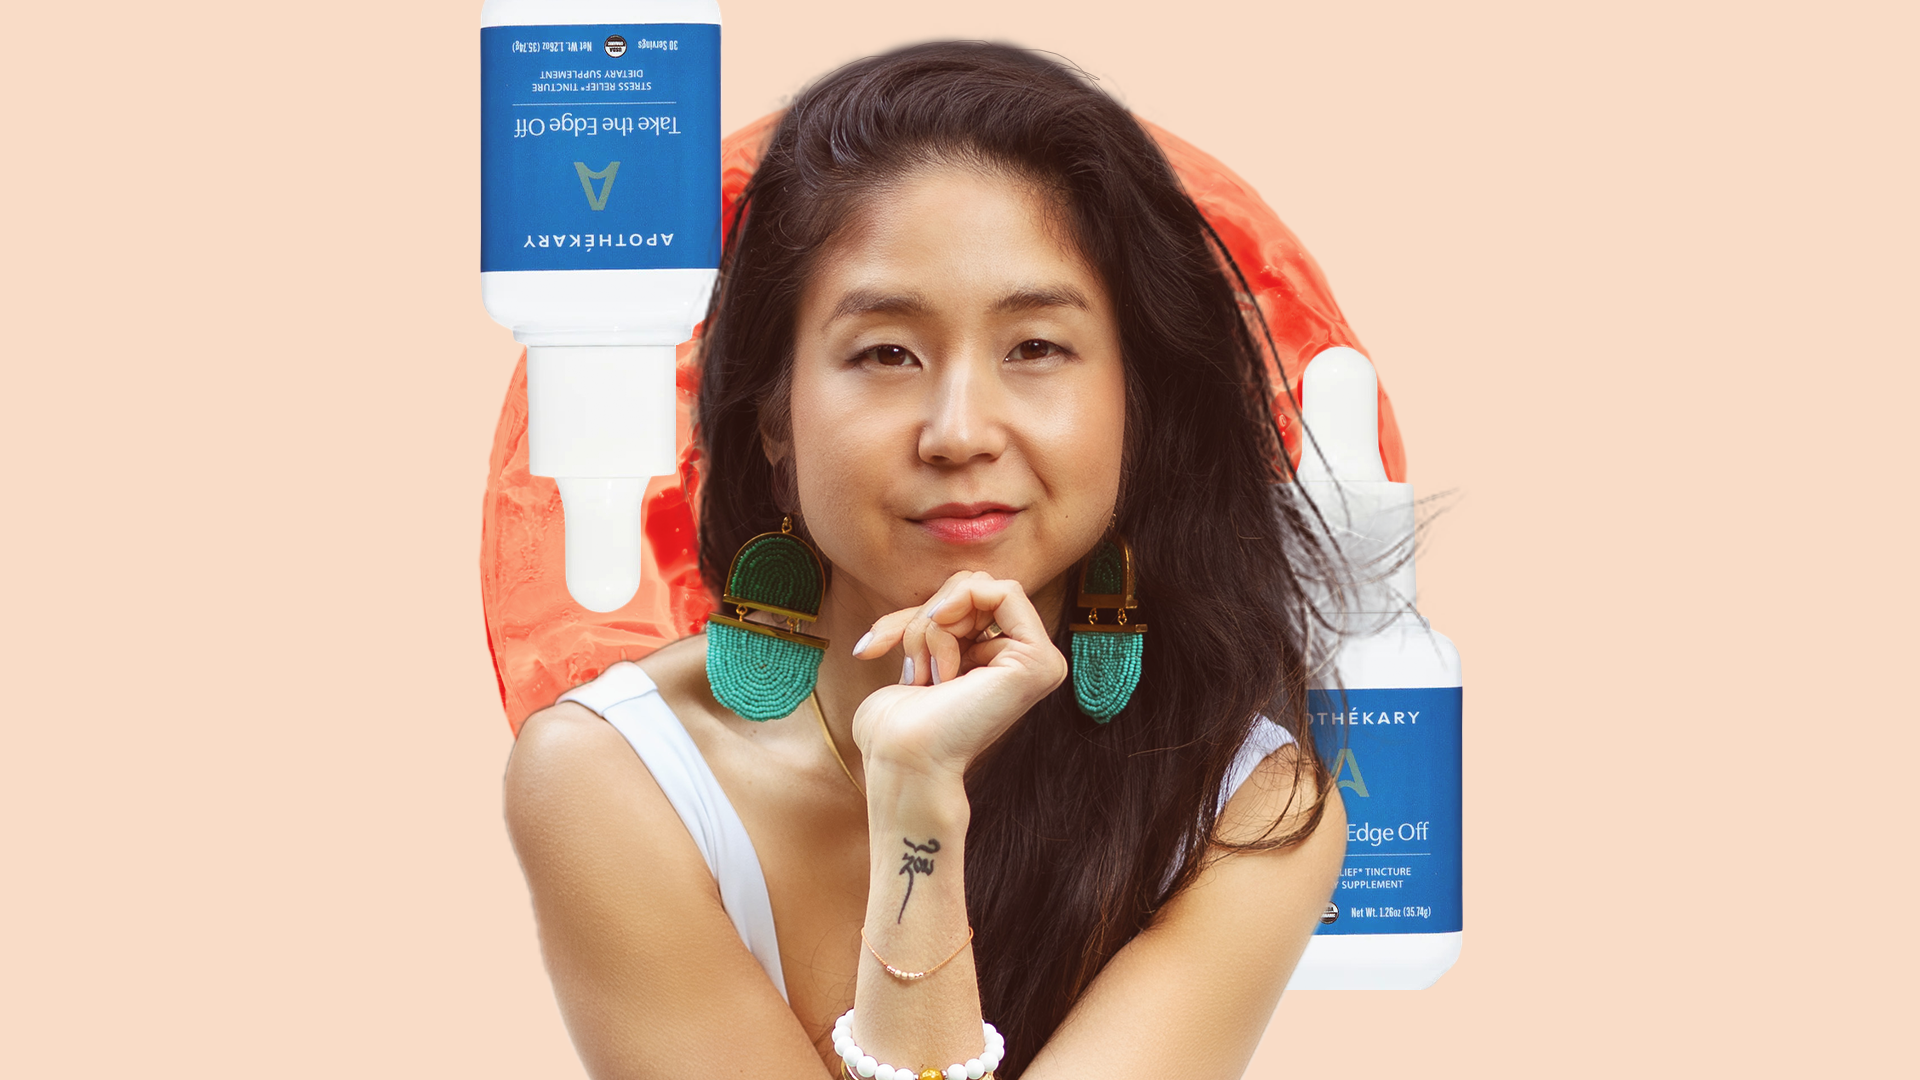 How Shizu Okusa Went From Founding a Cold-Pressed-Juice Company to Creating the Herbal-Remedy Brand Apothékary